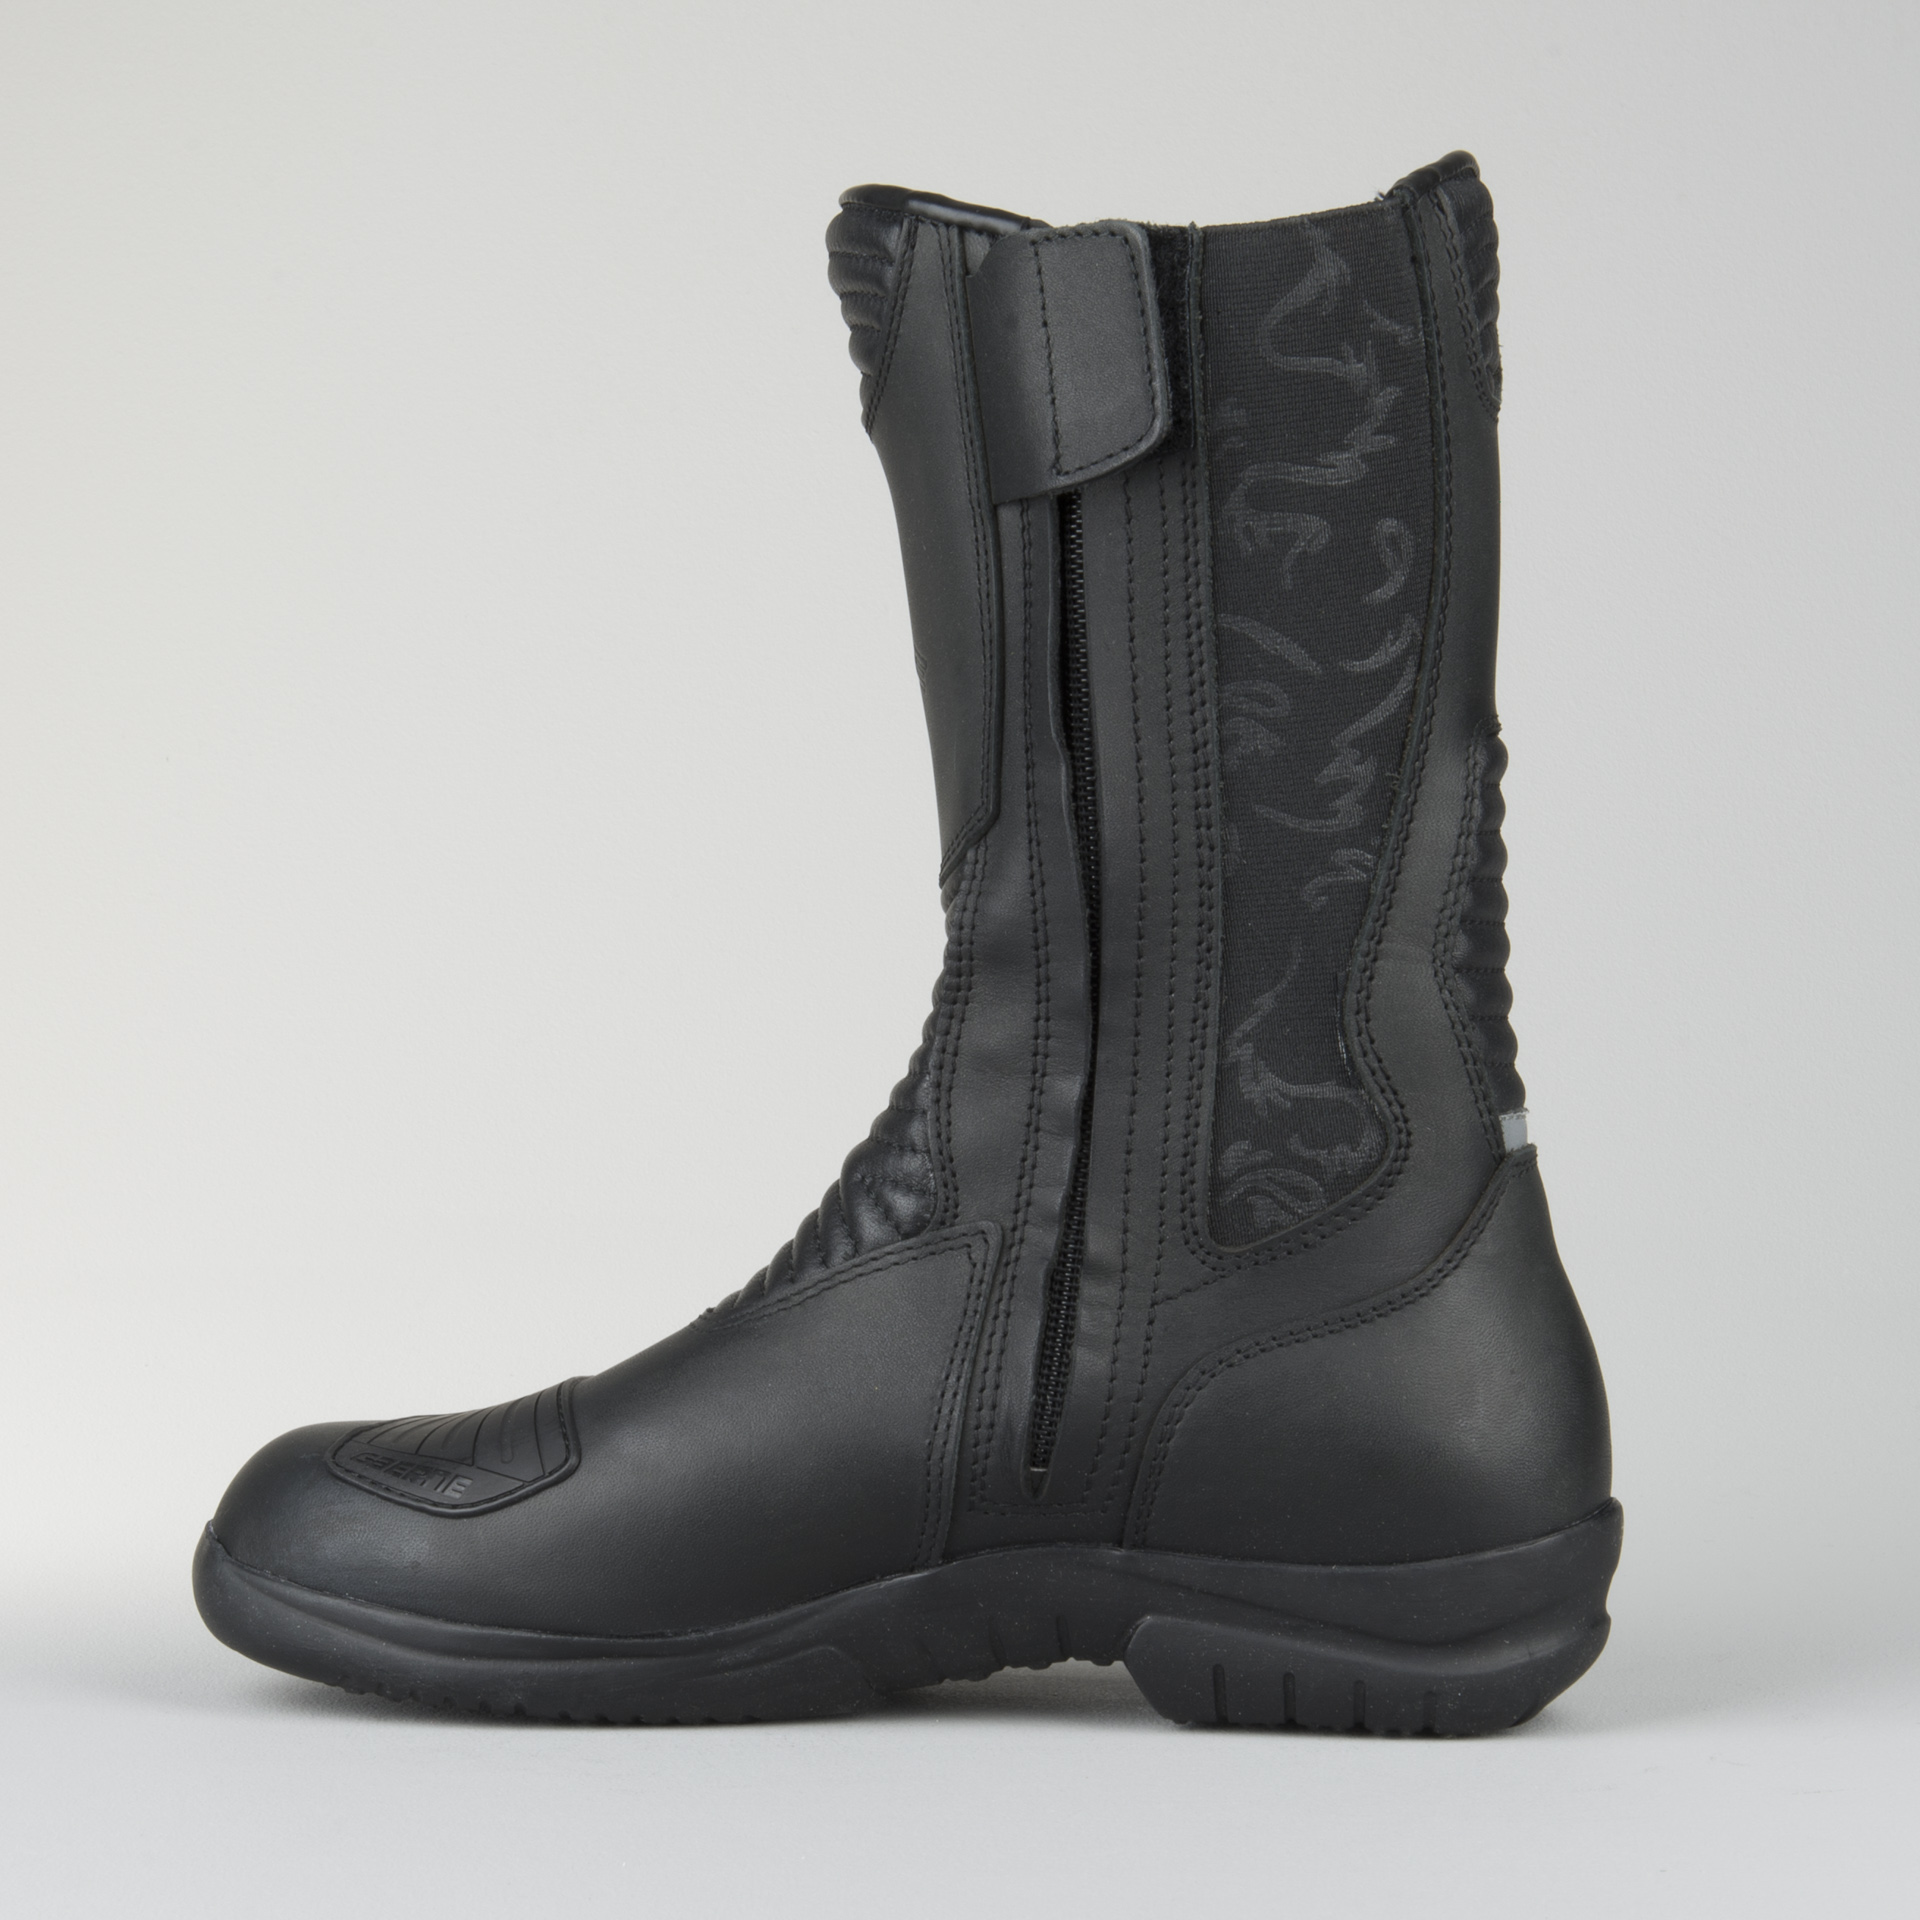 gaerne women's motorcycle boots